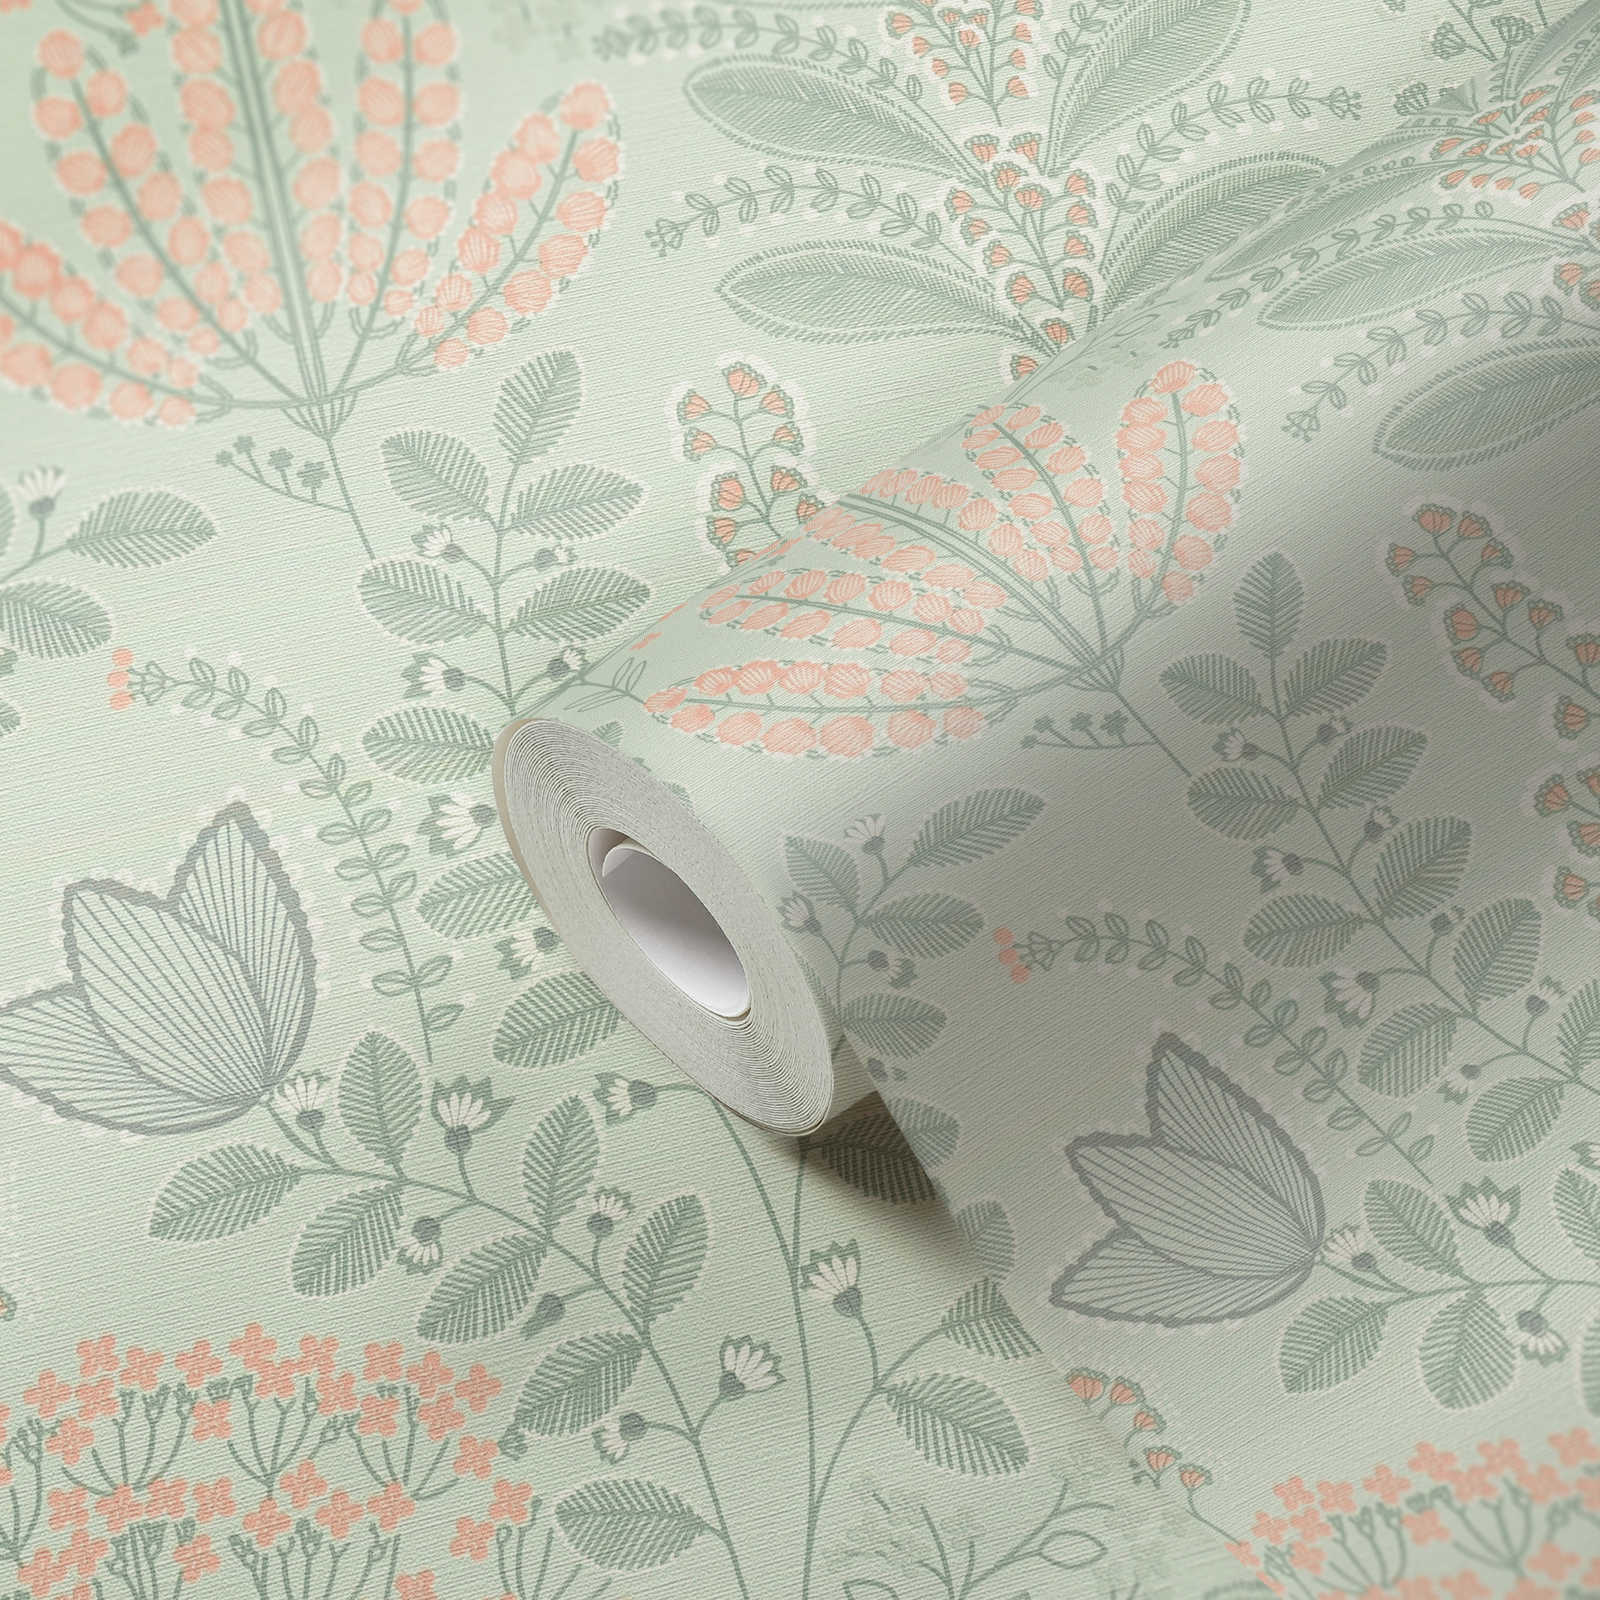             wallpaper floral with leaves in retro look light textured, matt - green, grey, pink
        